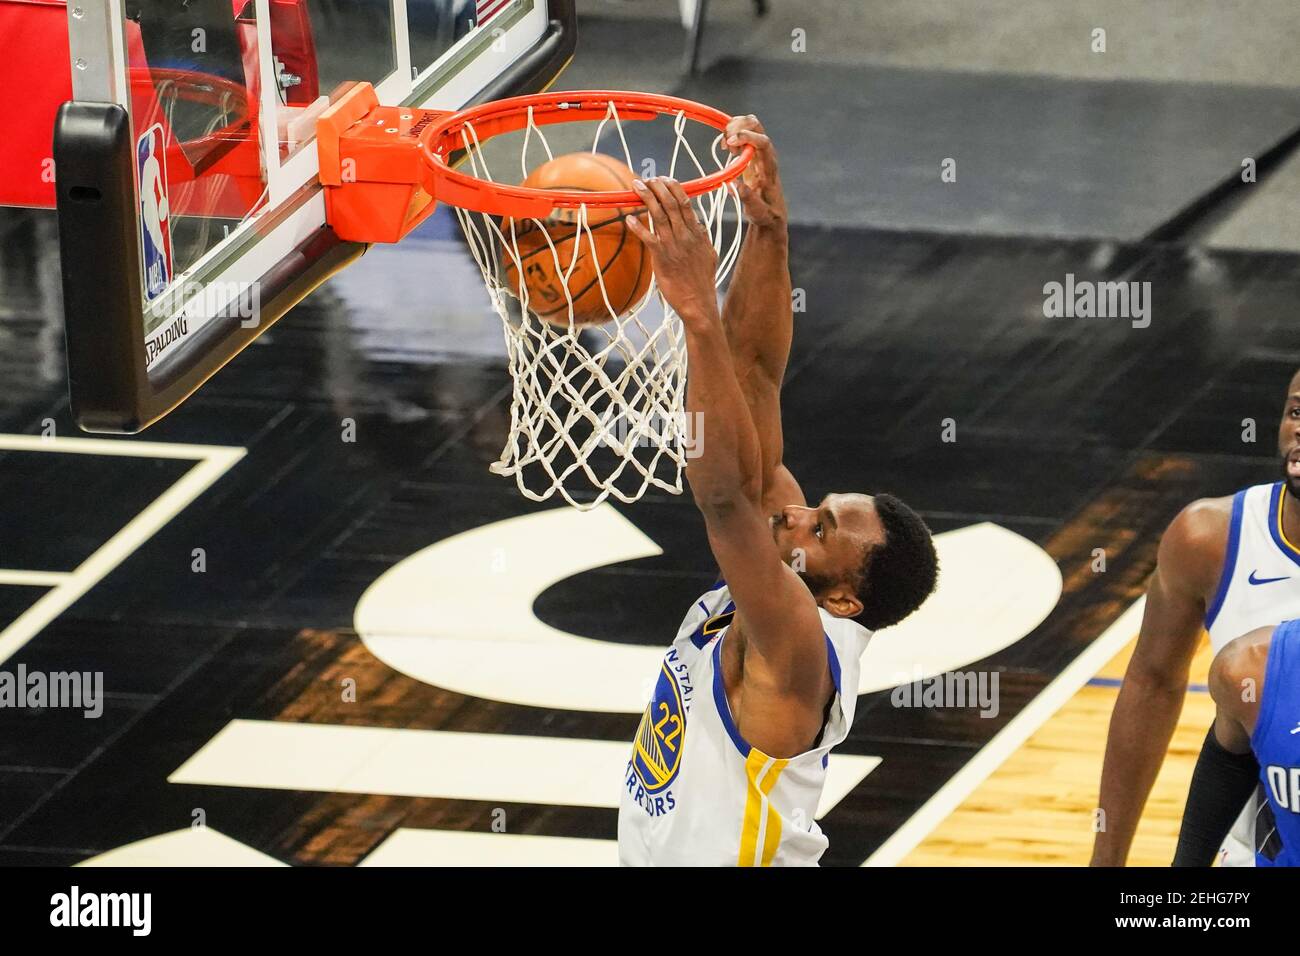 Orlando, Florida, USA, February 19, 2021, Golden State Warriors player Andrew Wiggins #22 makes a dunk against the Orlando Magic at the Amway Center  (Photo Credit:  Marty Jean-Louis) Credit: Marty Jean-Louis/Alamy Live News Stock Photo